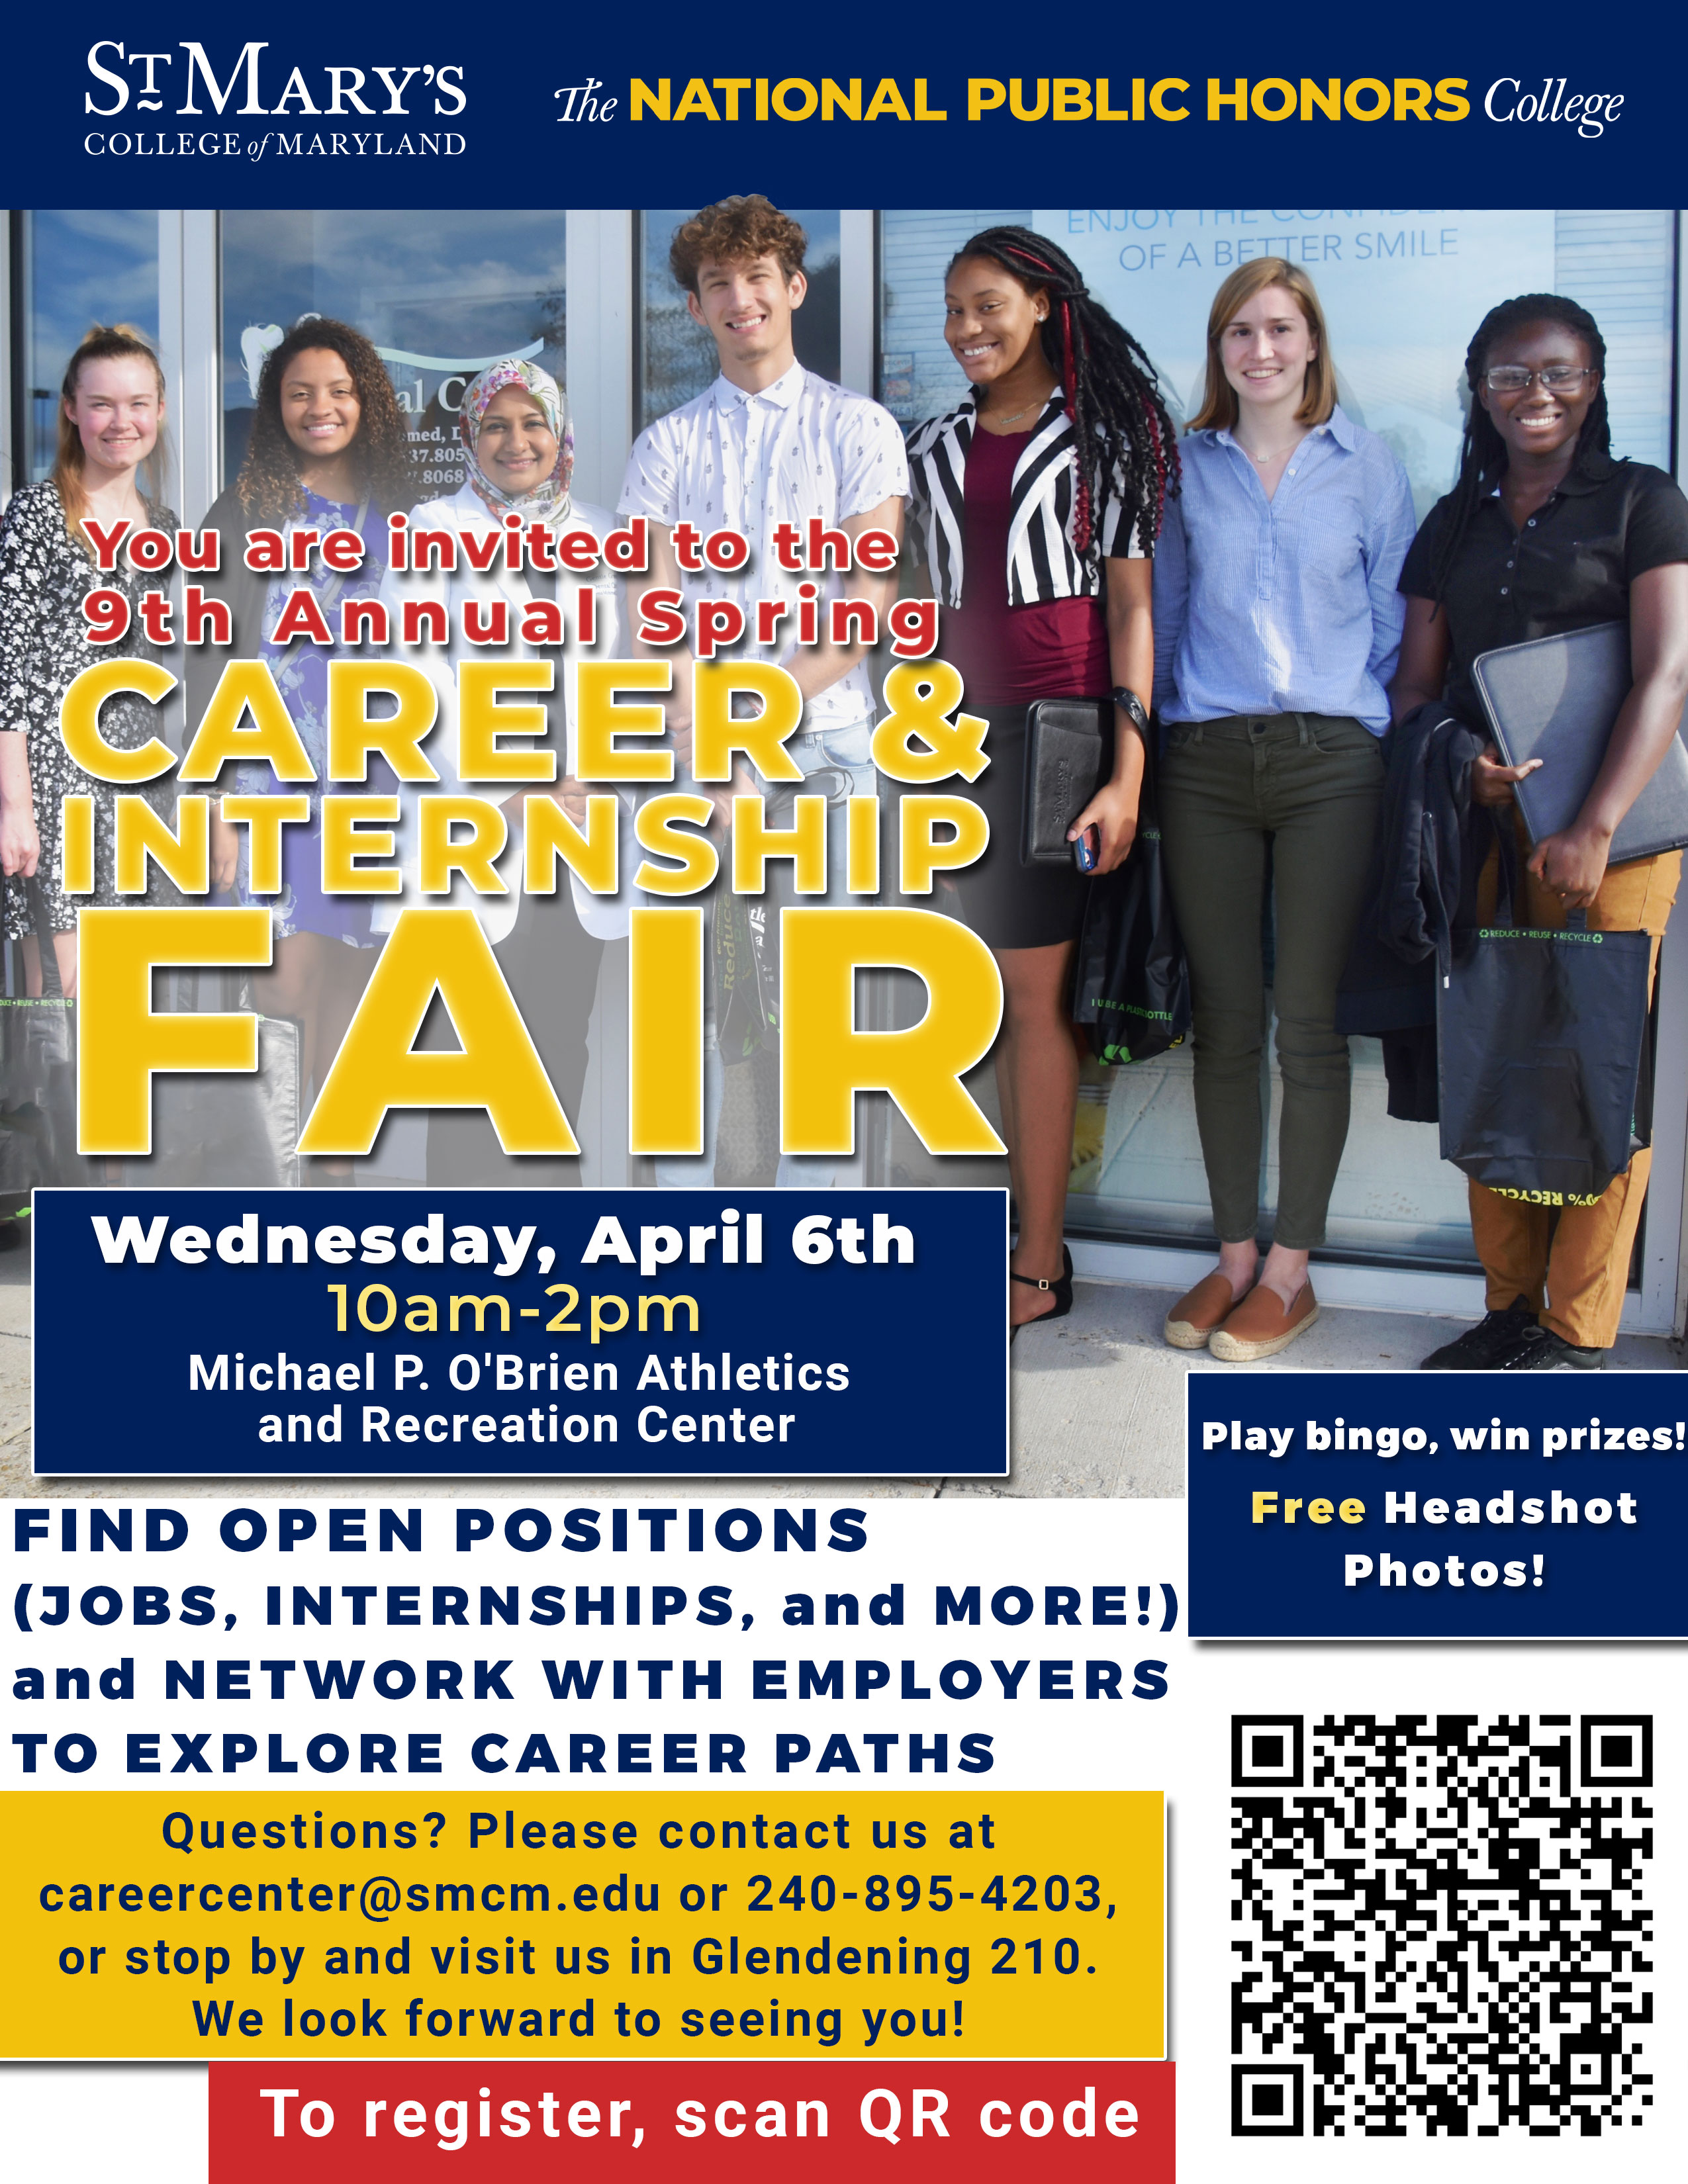 Need a Job or Internship? Exploring Careers? Come to the Career